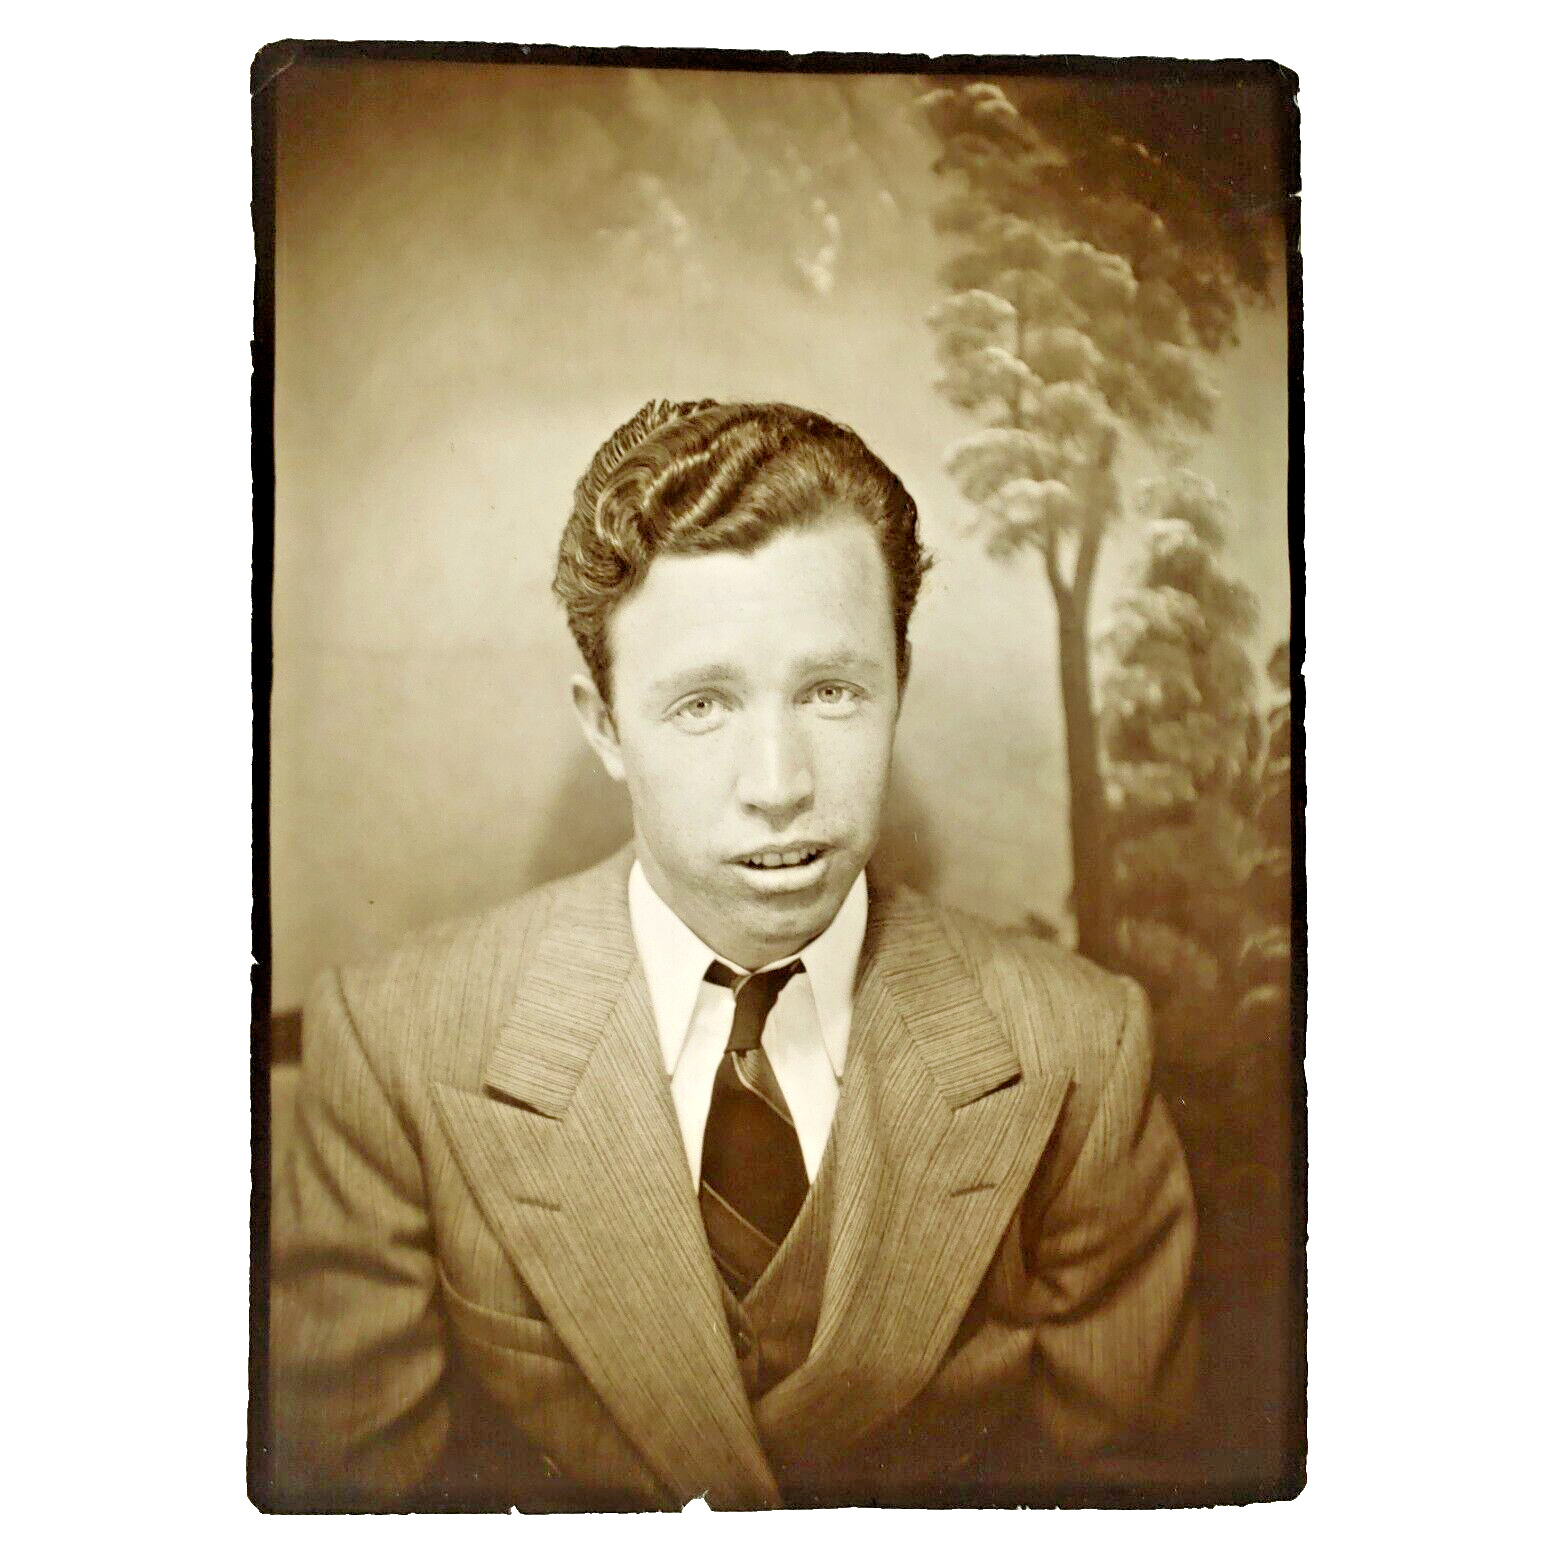 Suave Handsome Man Photobooth Photo 1940s Forest Backdrop & Greased Hair B3341